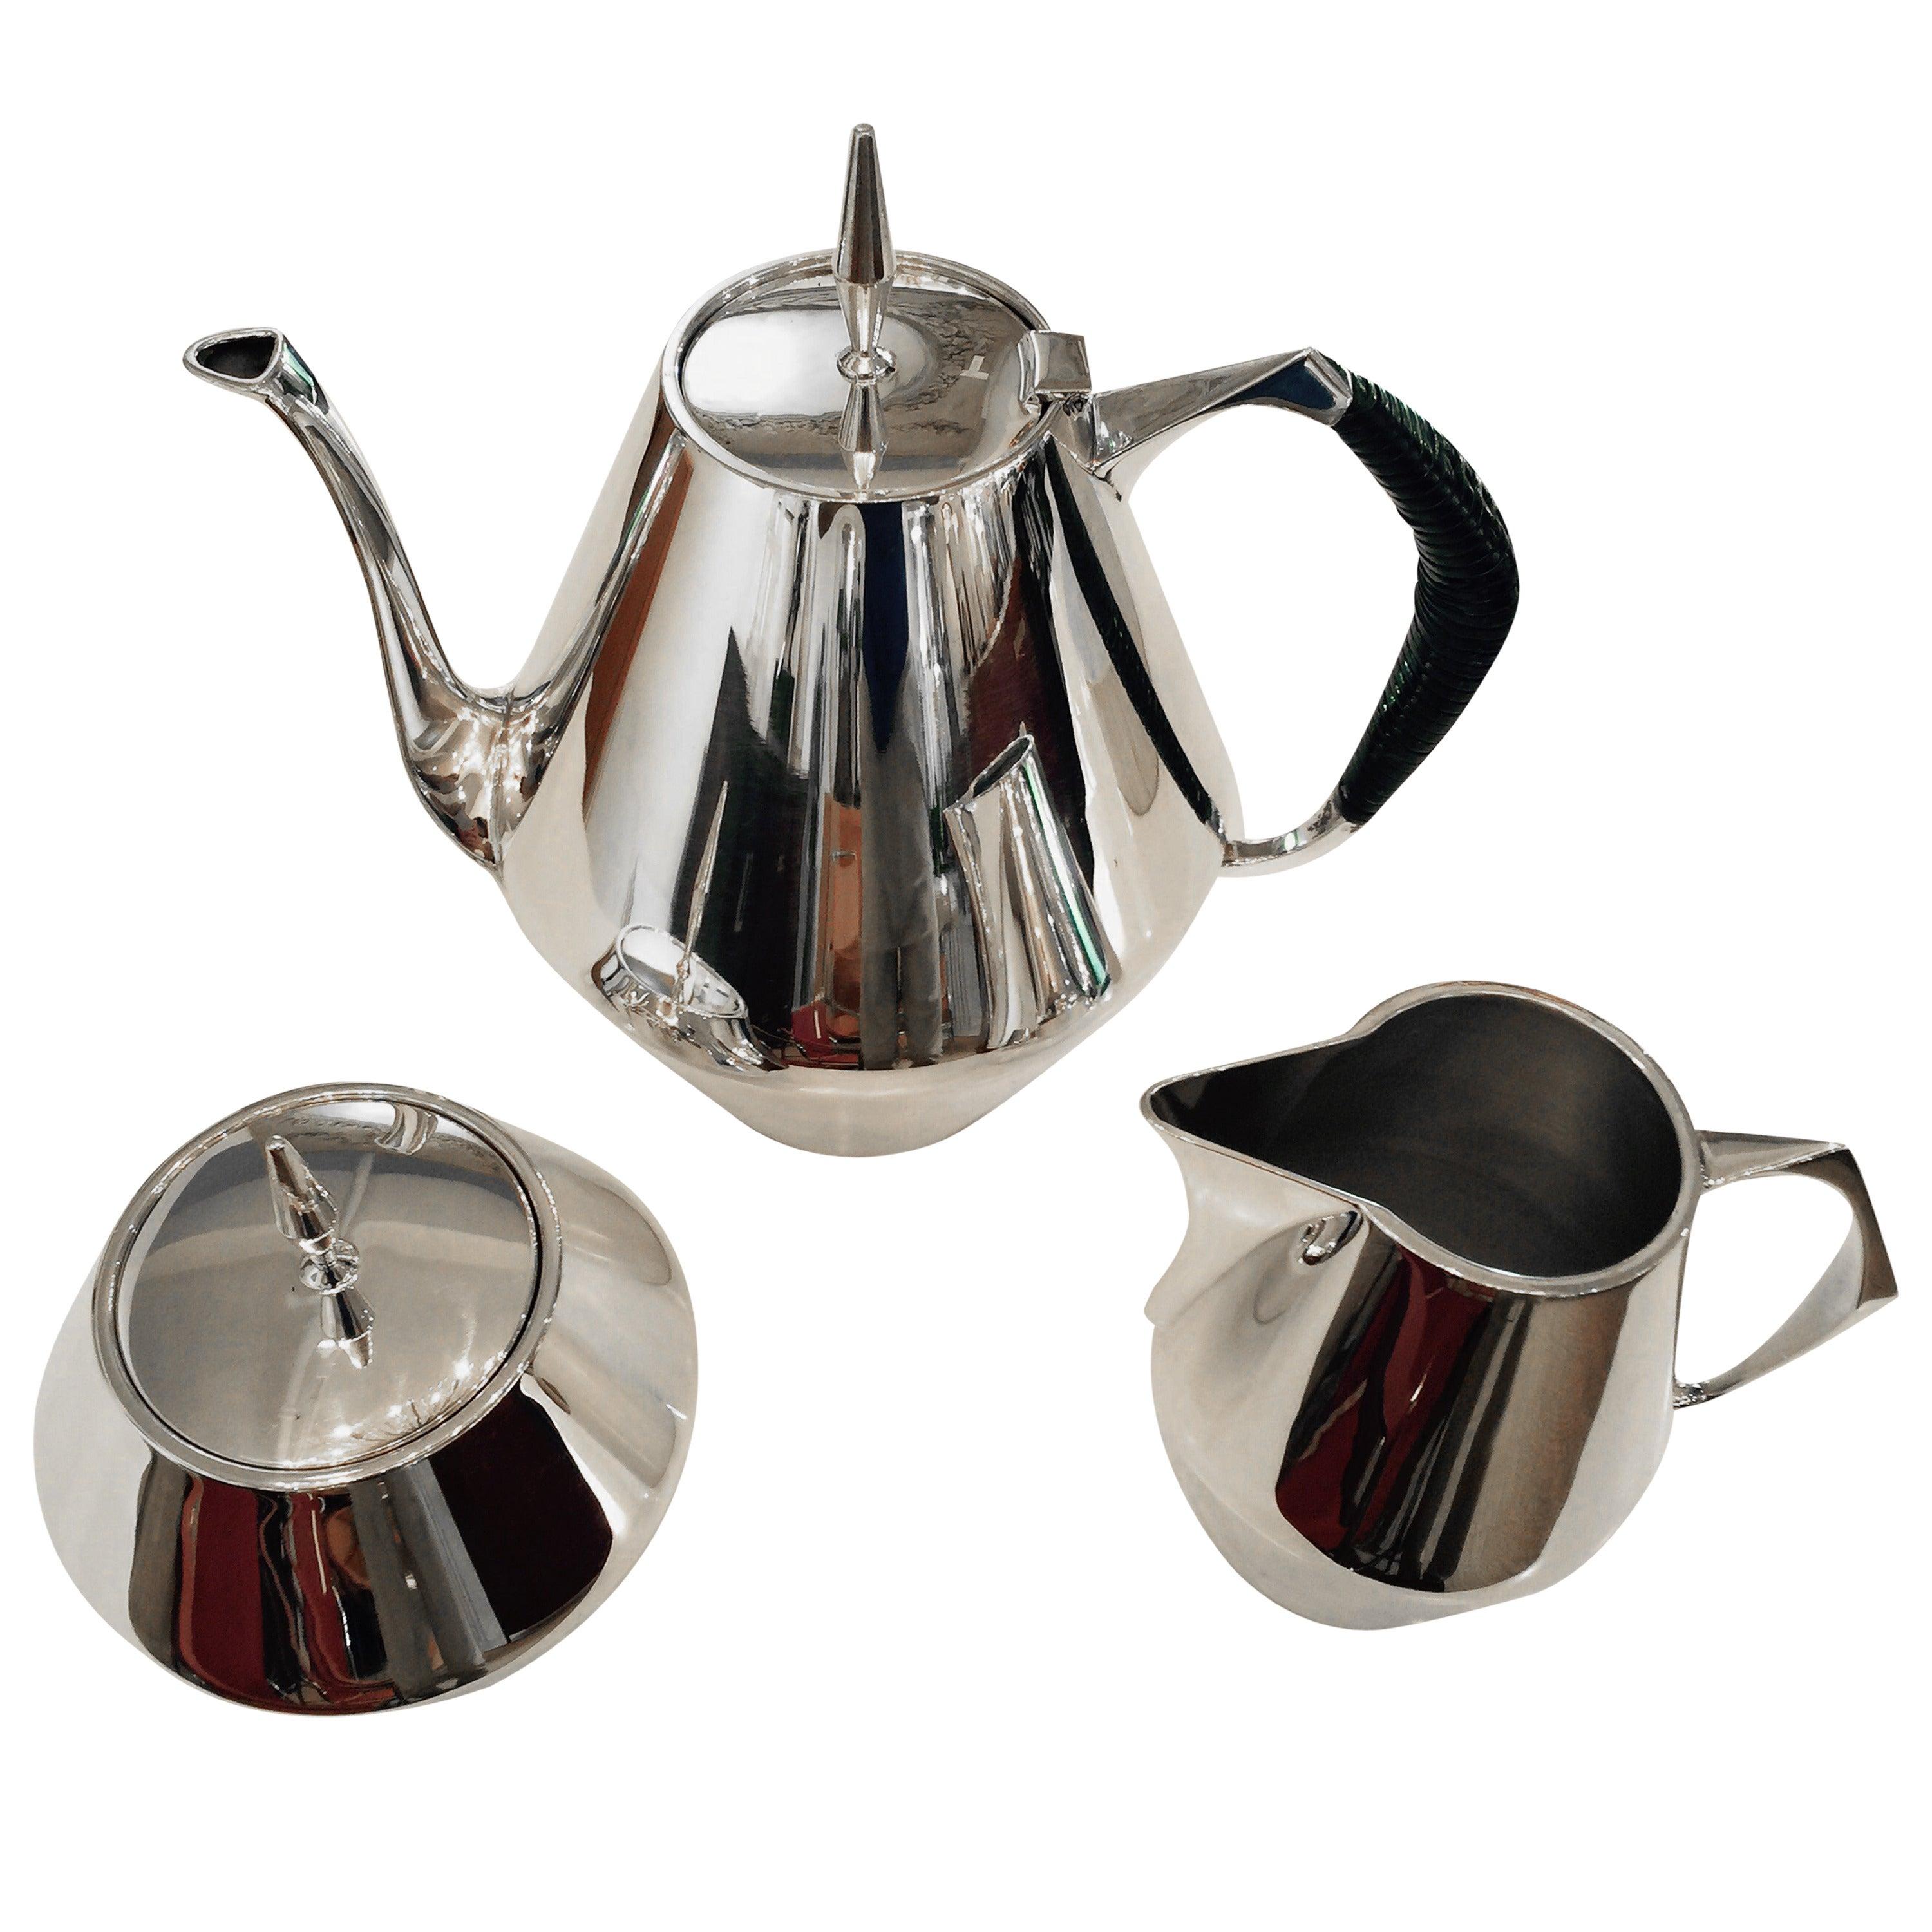 Three-piece Tea serving set in sterling silver designed by Gio Ponti for Reed & Barton in the Diamond pattern. USA, circa 1950. 

Includes a tea pot, creamer and sugar jar. Tea pot and sugar jar are lidded. Tea pot features black cane-covered